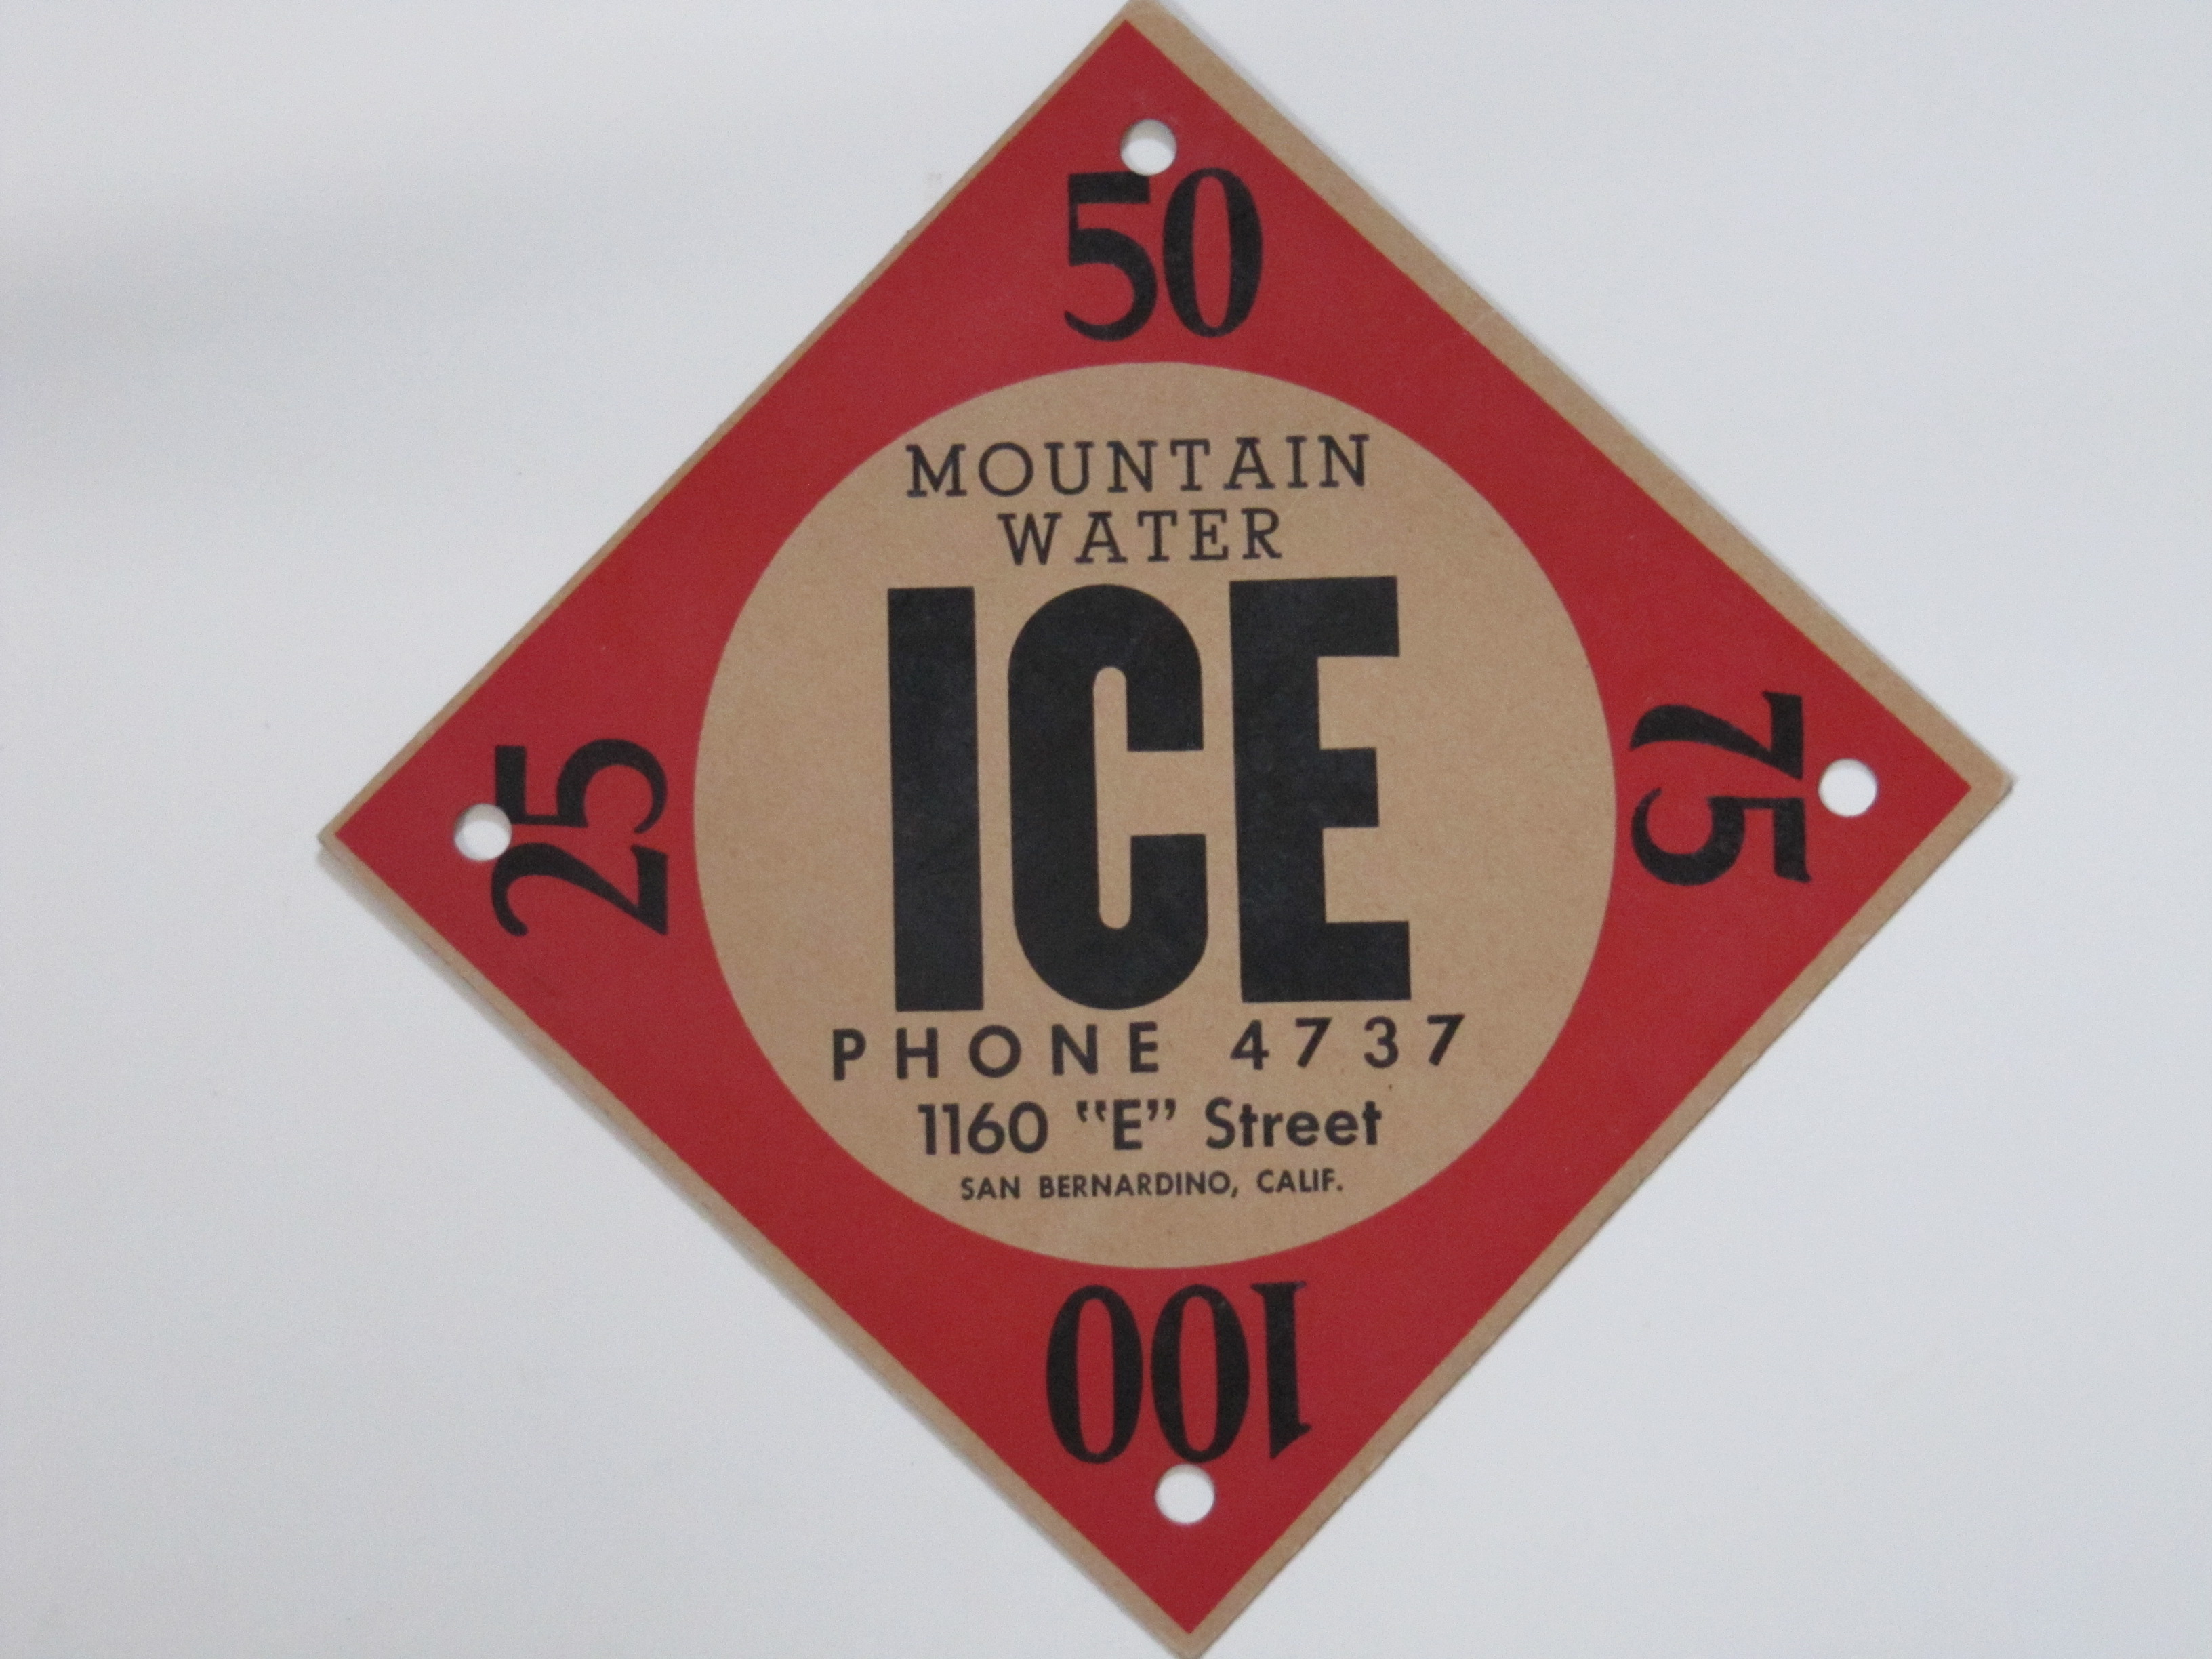 Mountain Water Ice Co.